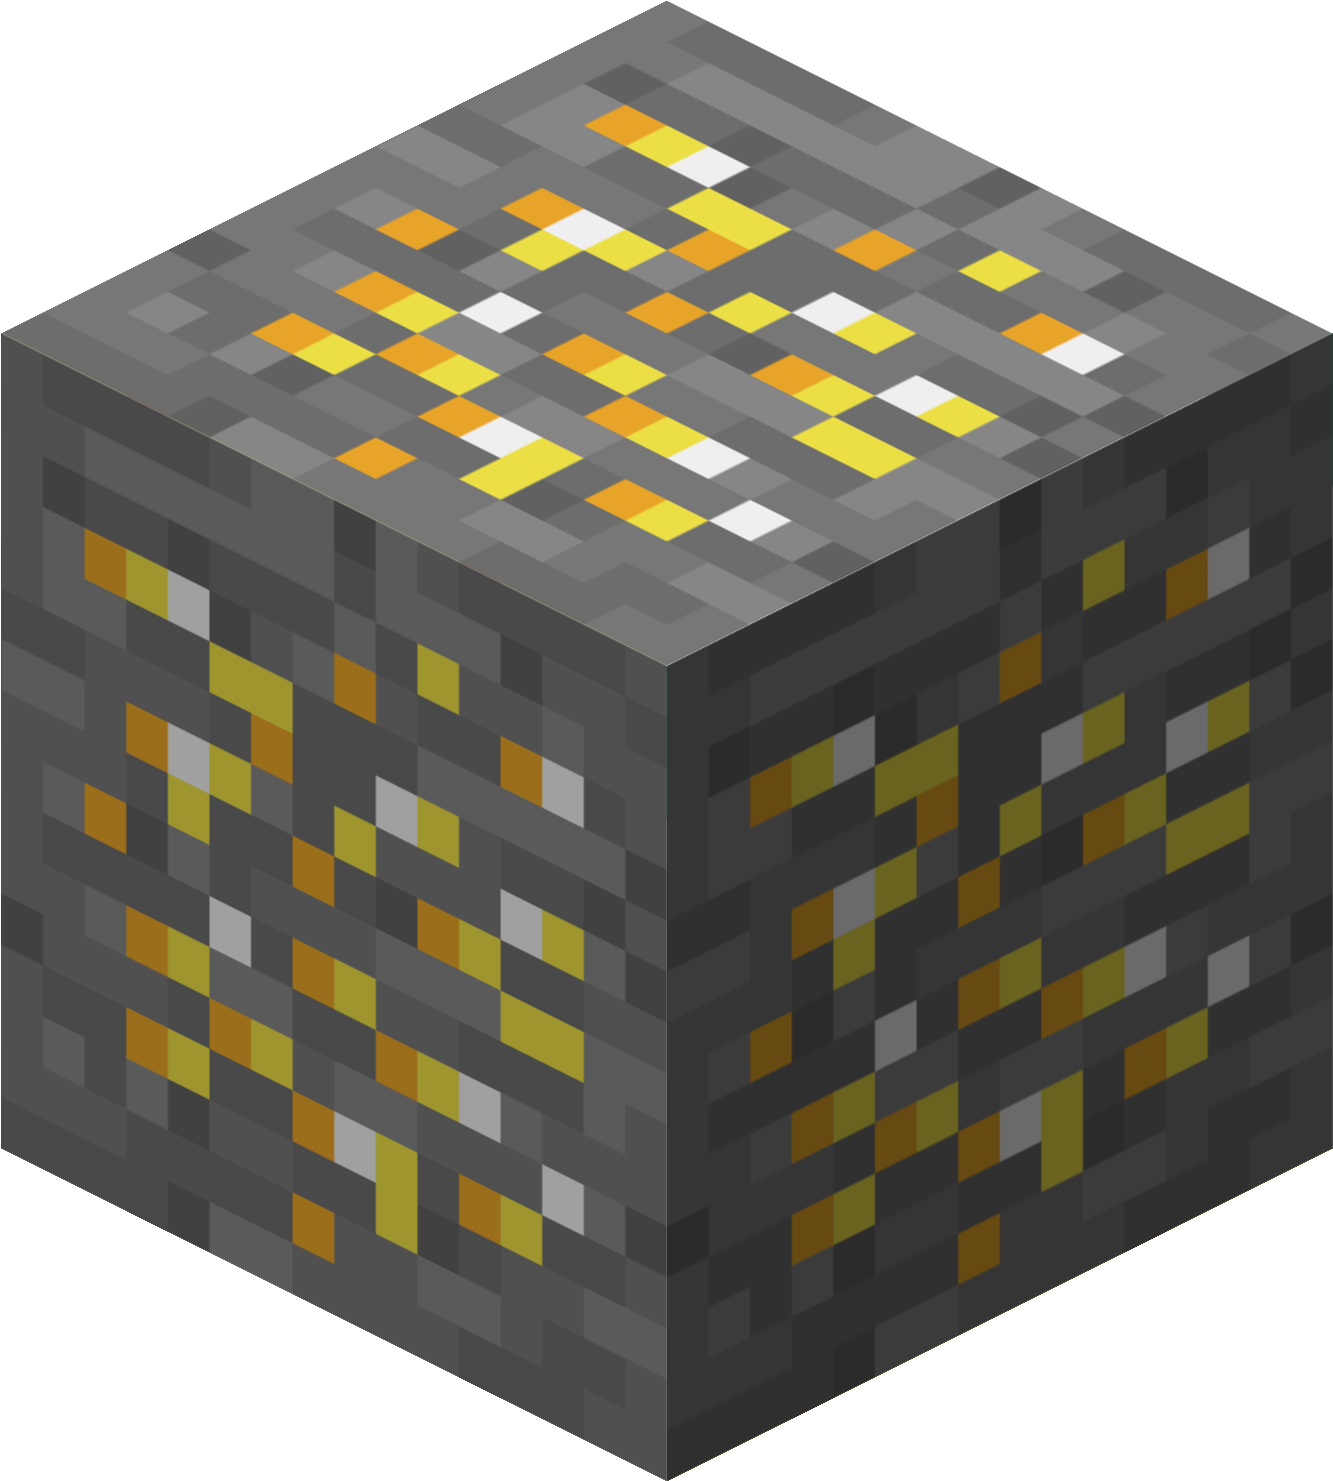 Gold Ore - Minecraft Gold Ore Block (1500x1500), Png Download